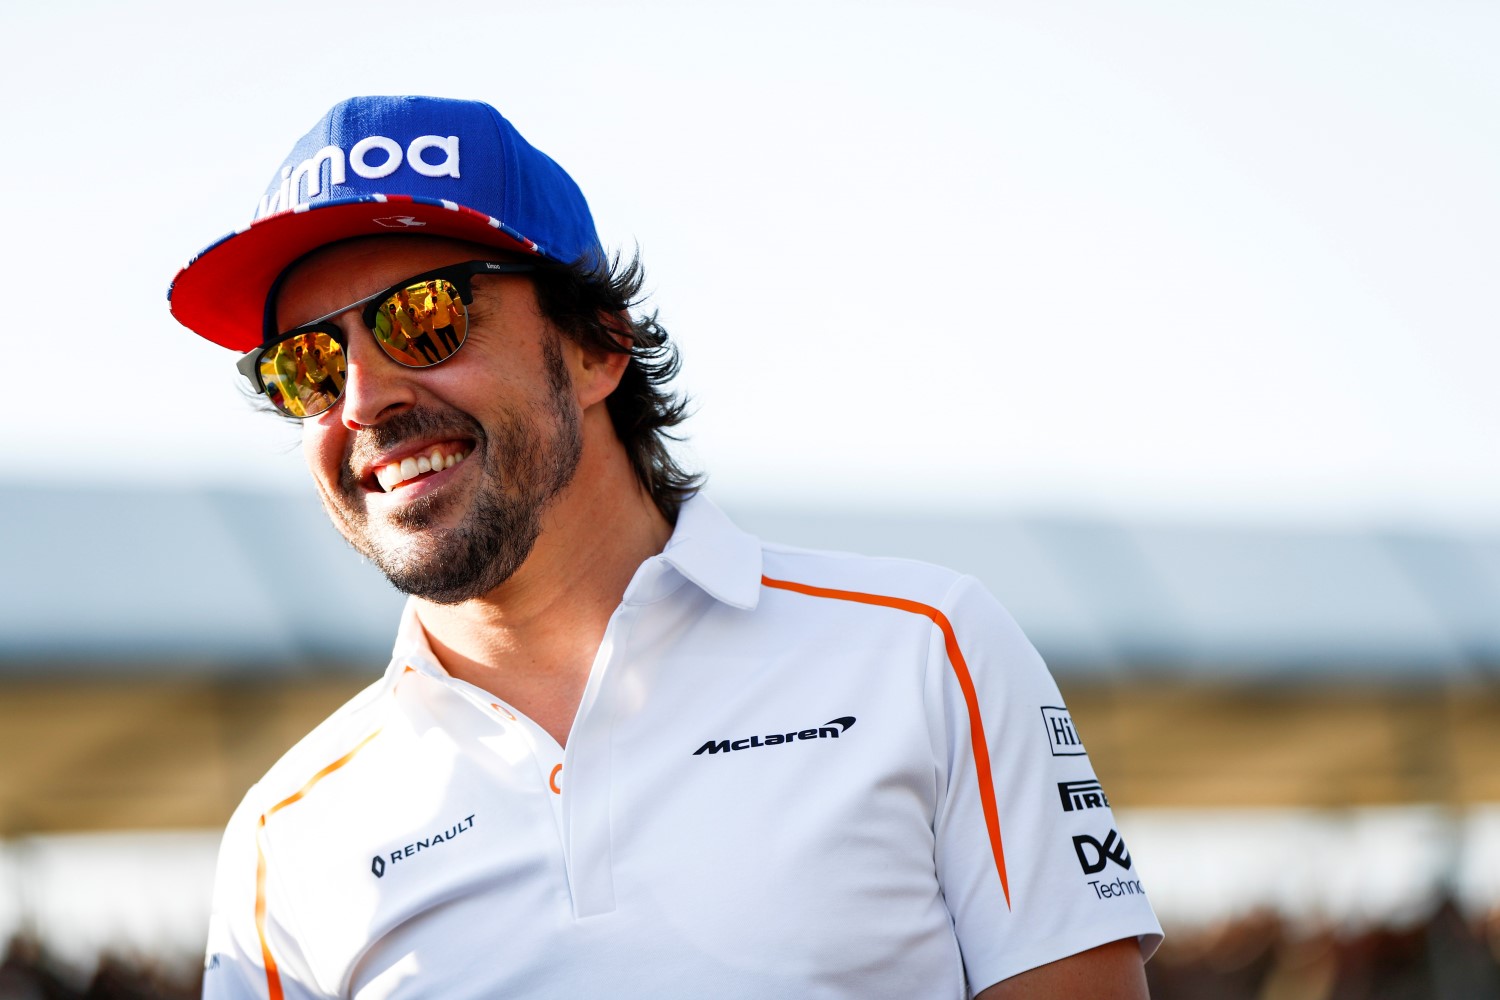 Alonso would love to replace Vettel. He can dream